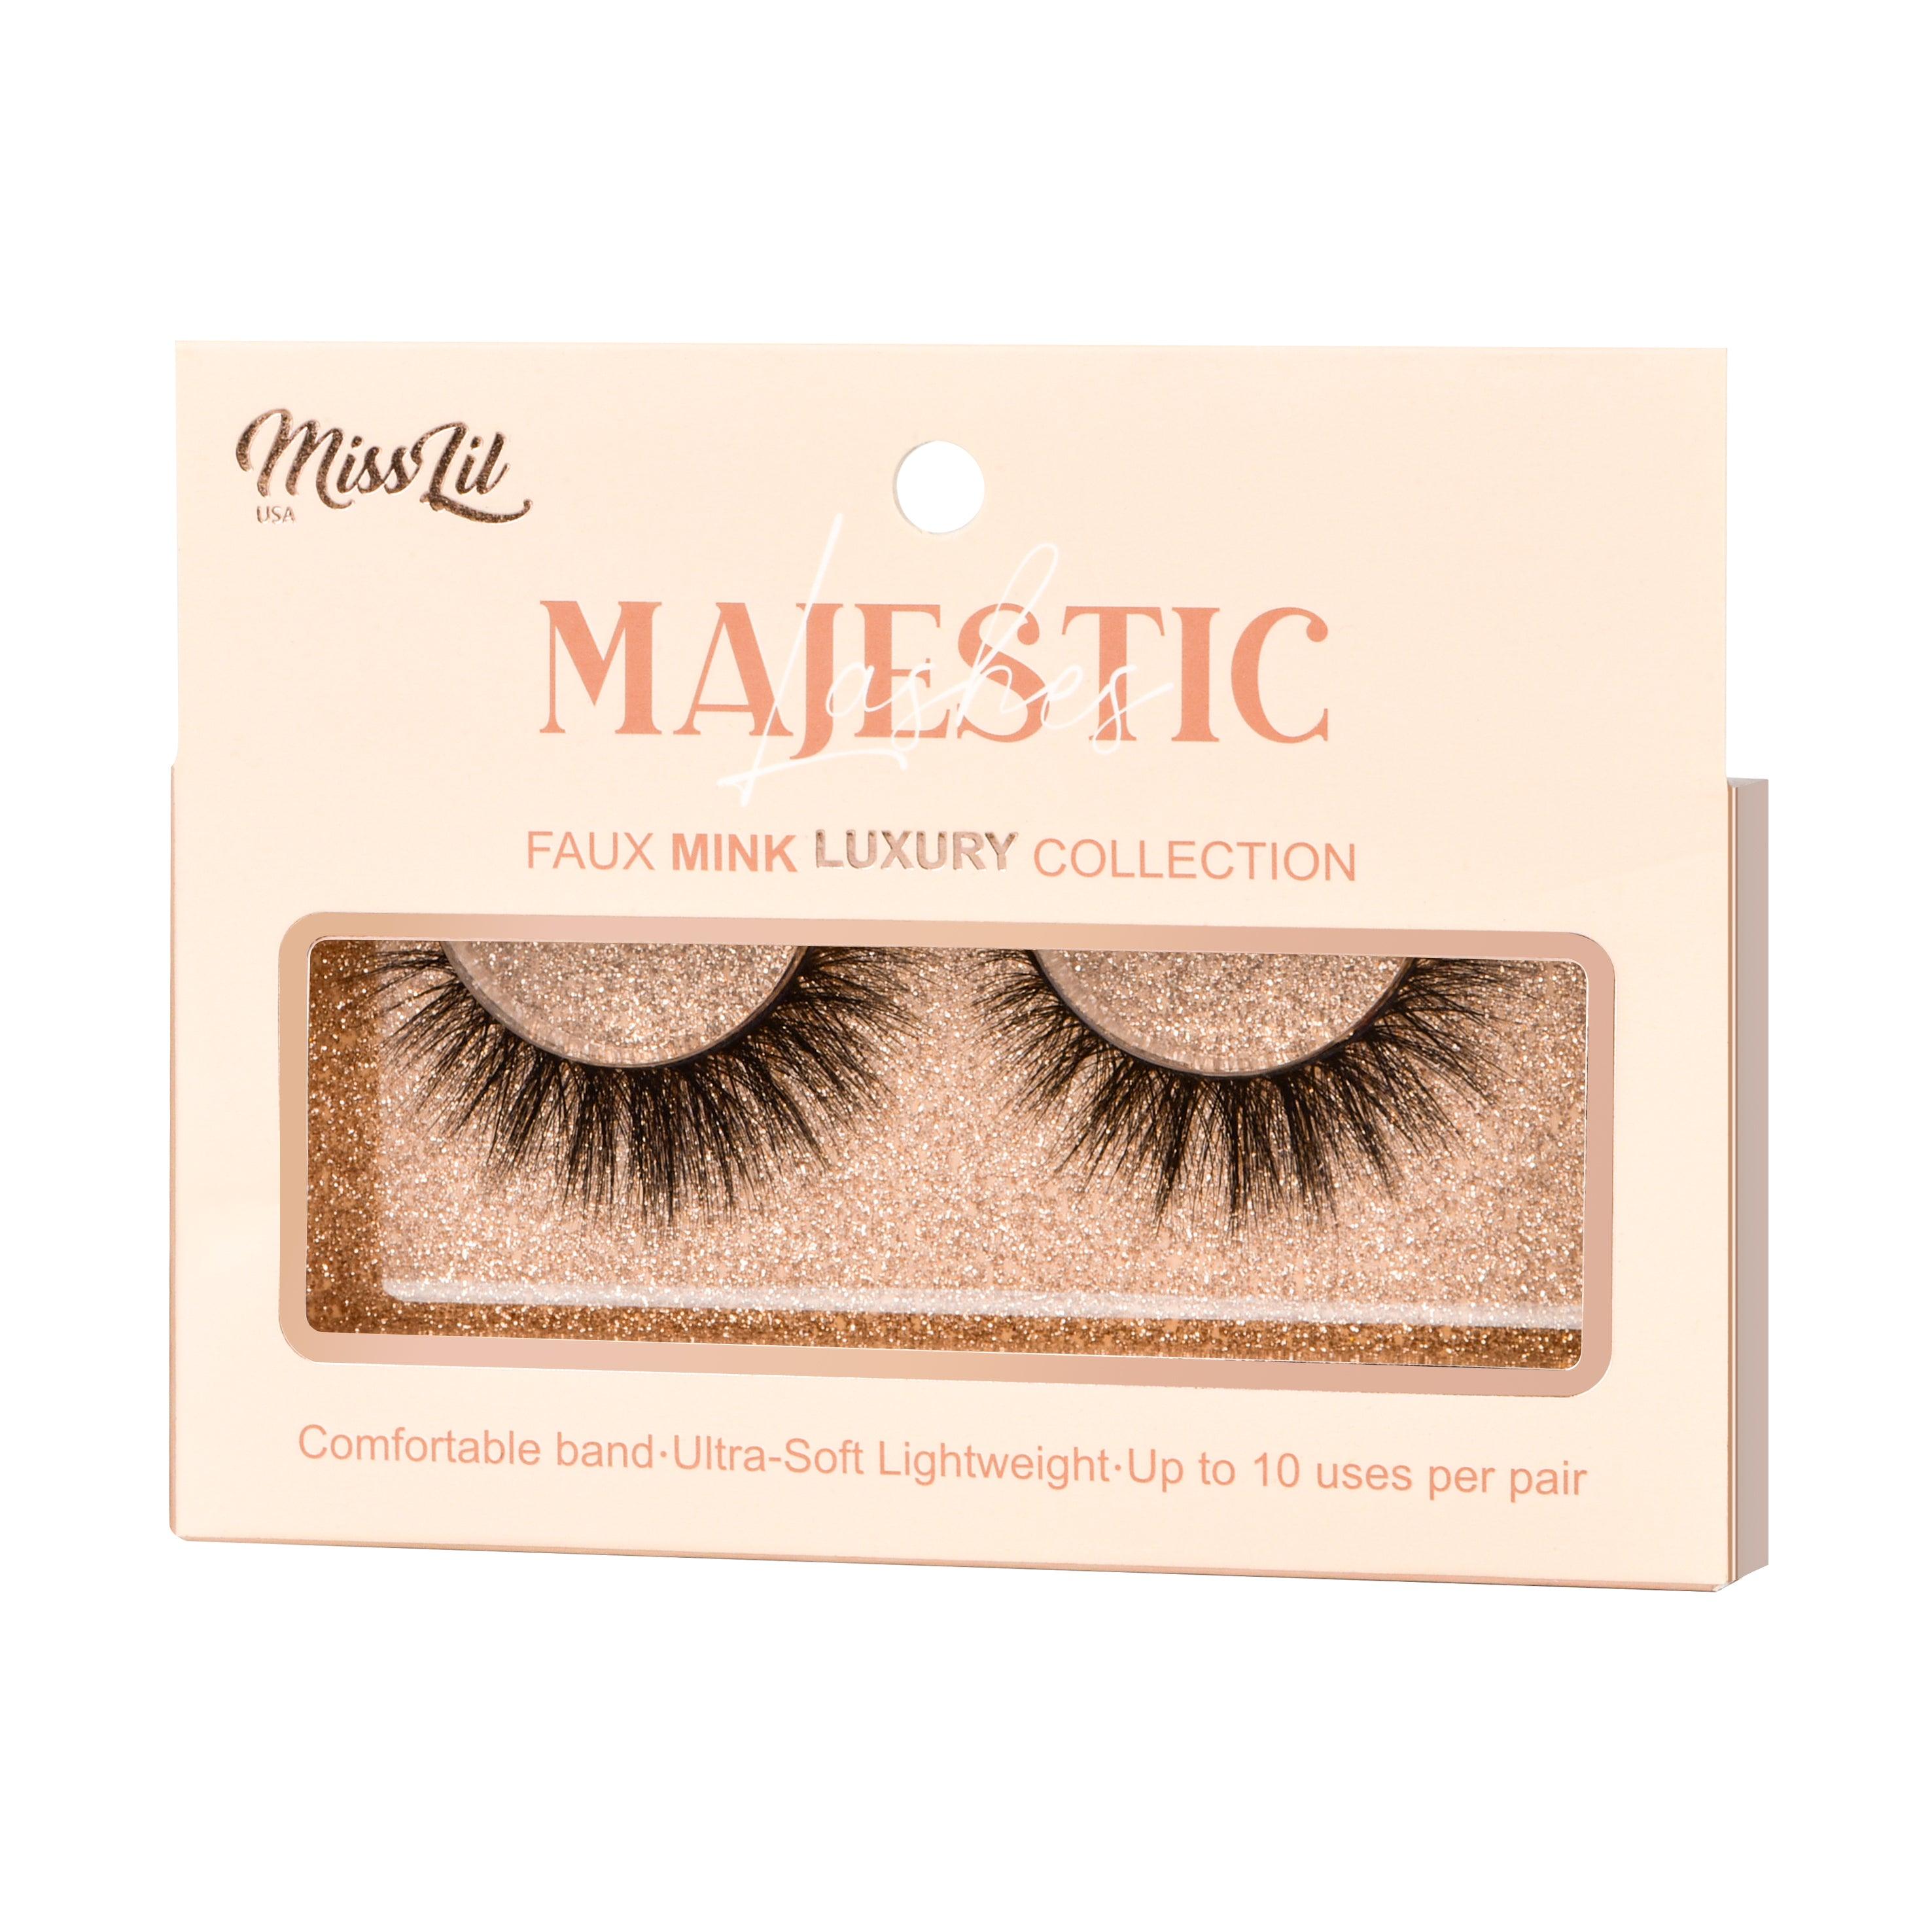 1-PAIR LASHES-MAJESTIC COLLECTION # 20 (PACK OF 3) - Miss Lil USA